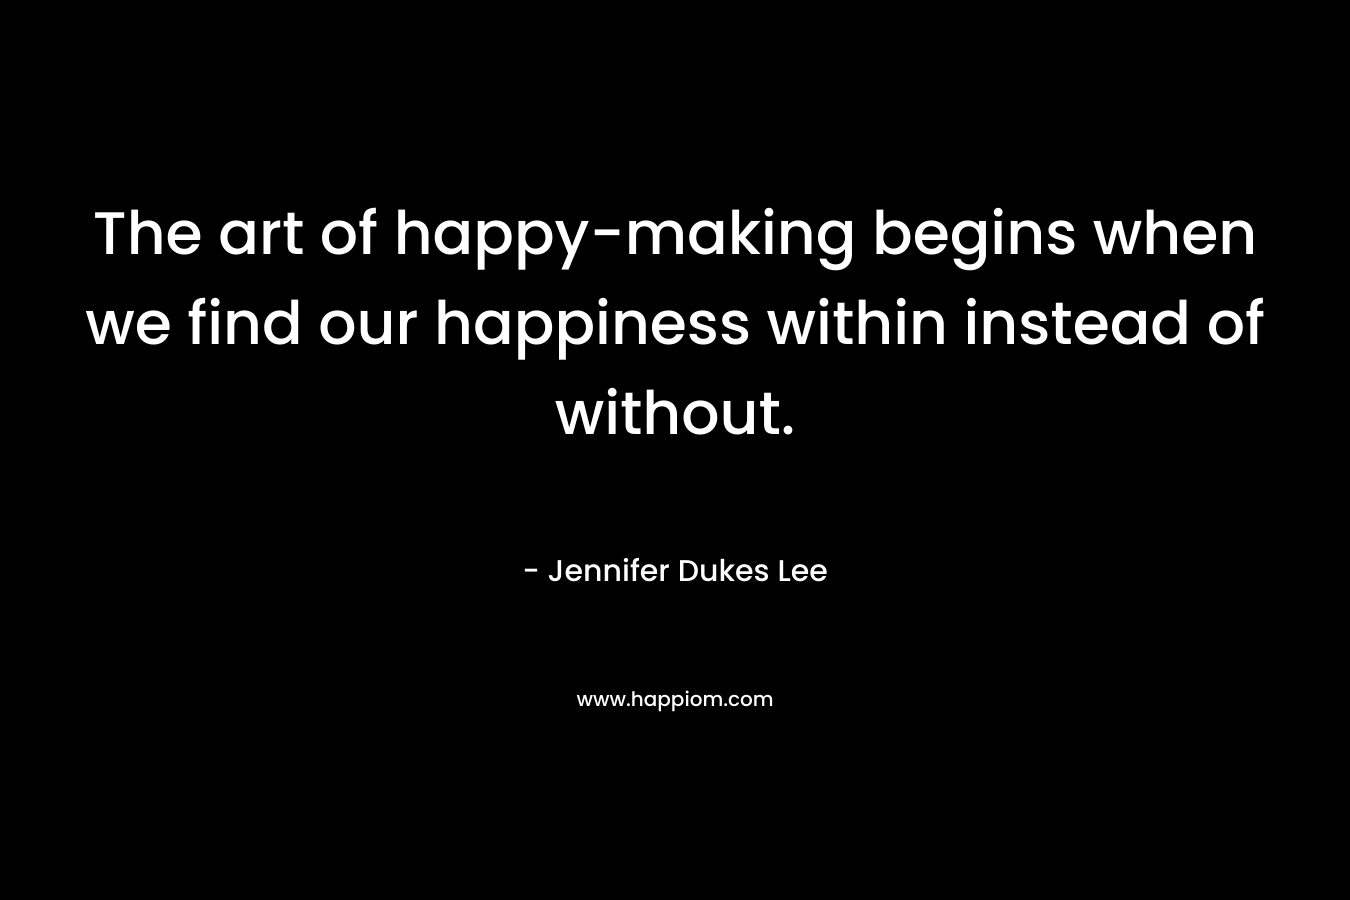 The art of happy-making begins when we find our happiness within instead of without. – Jennifer Dukes Lee